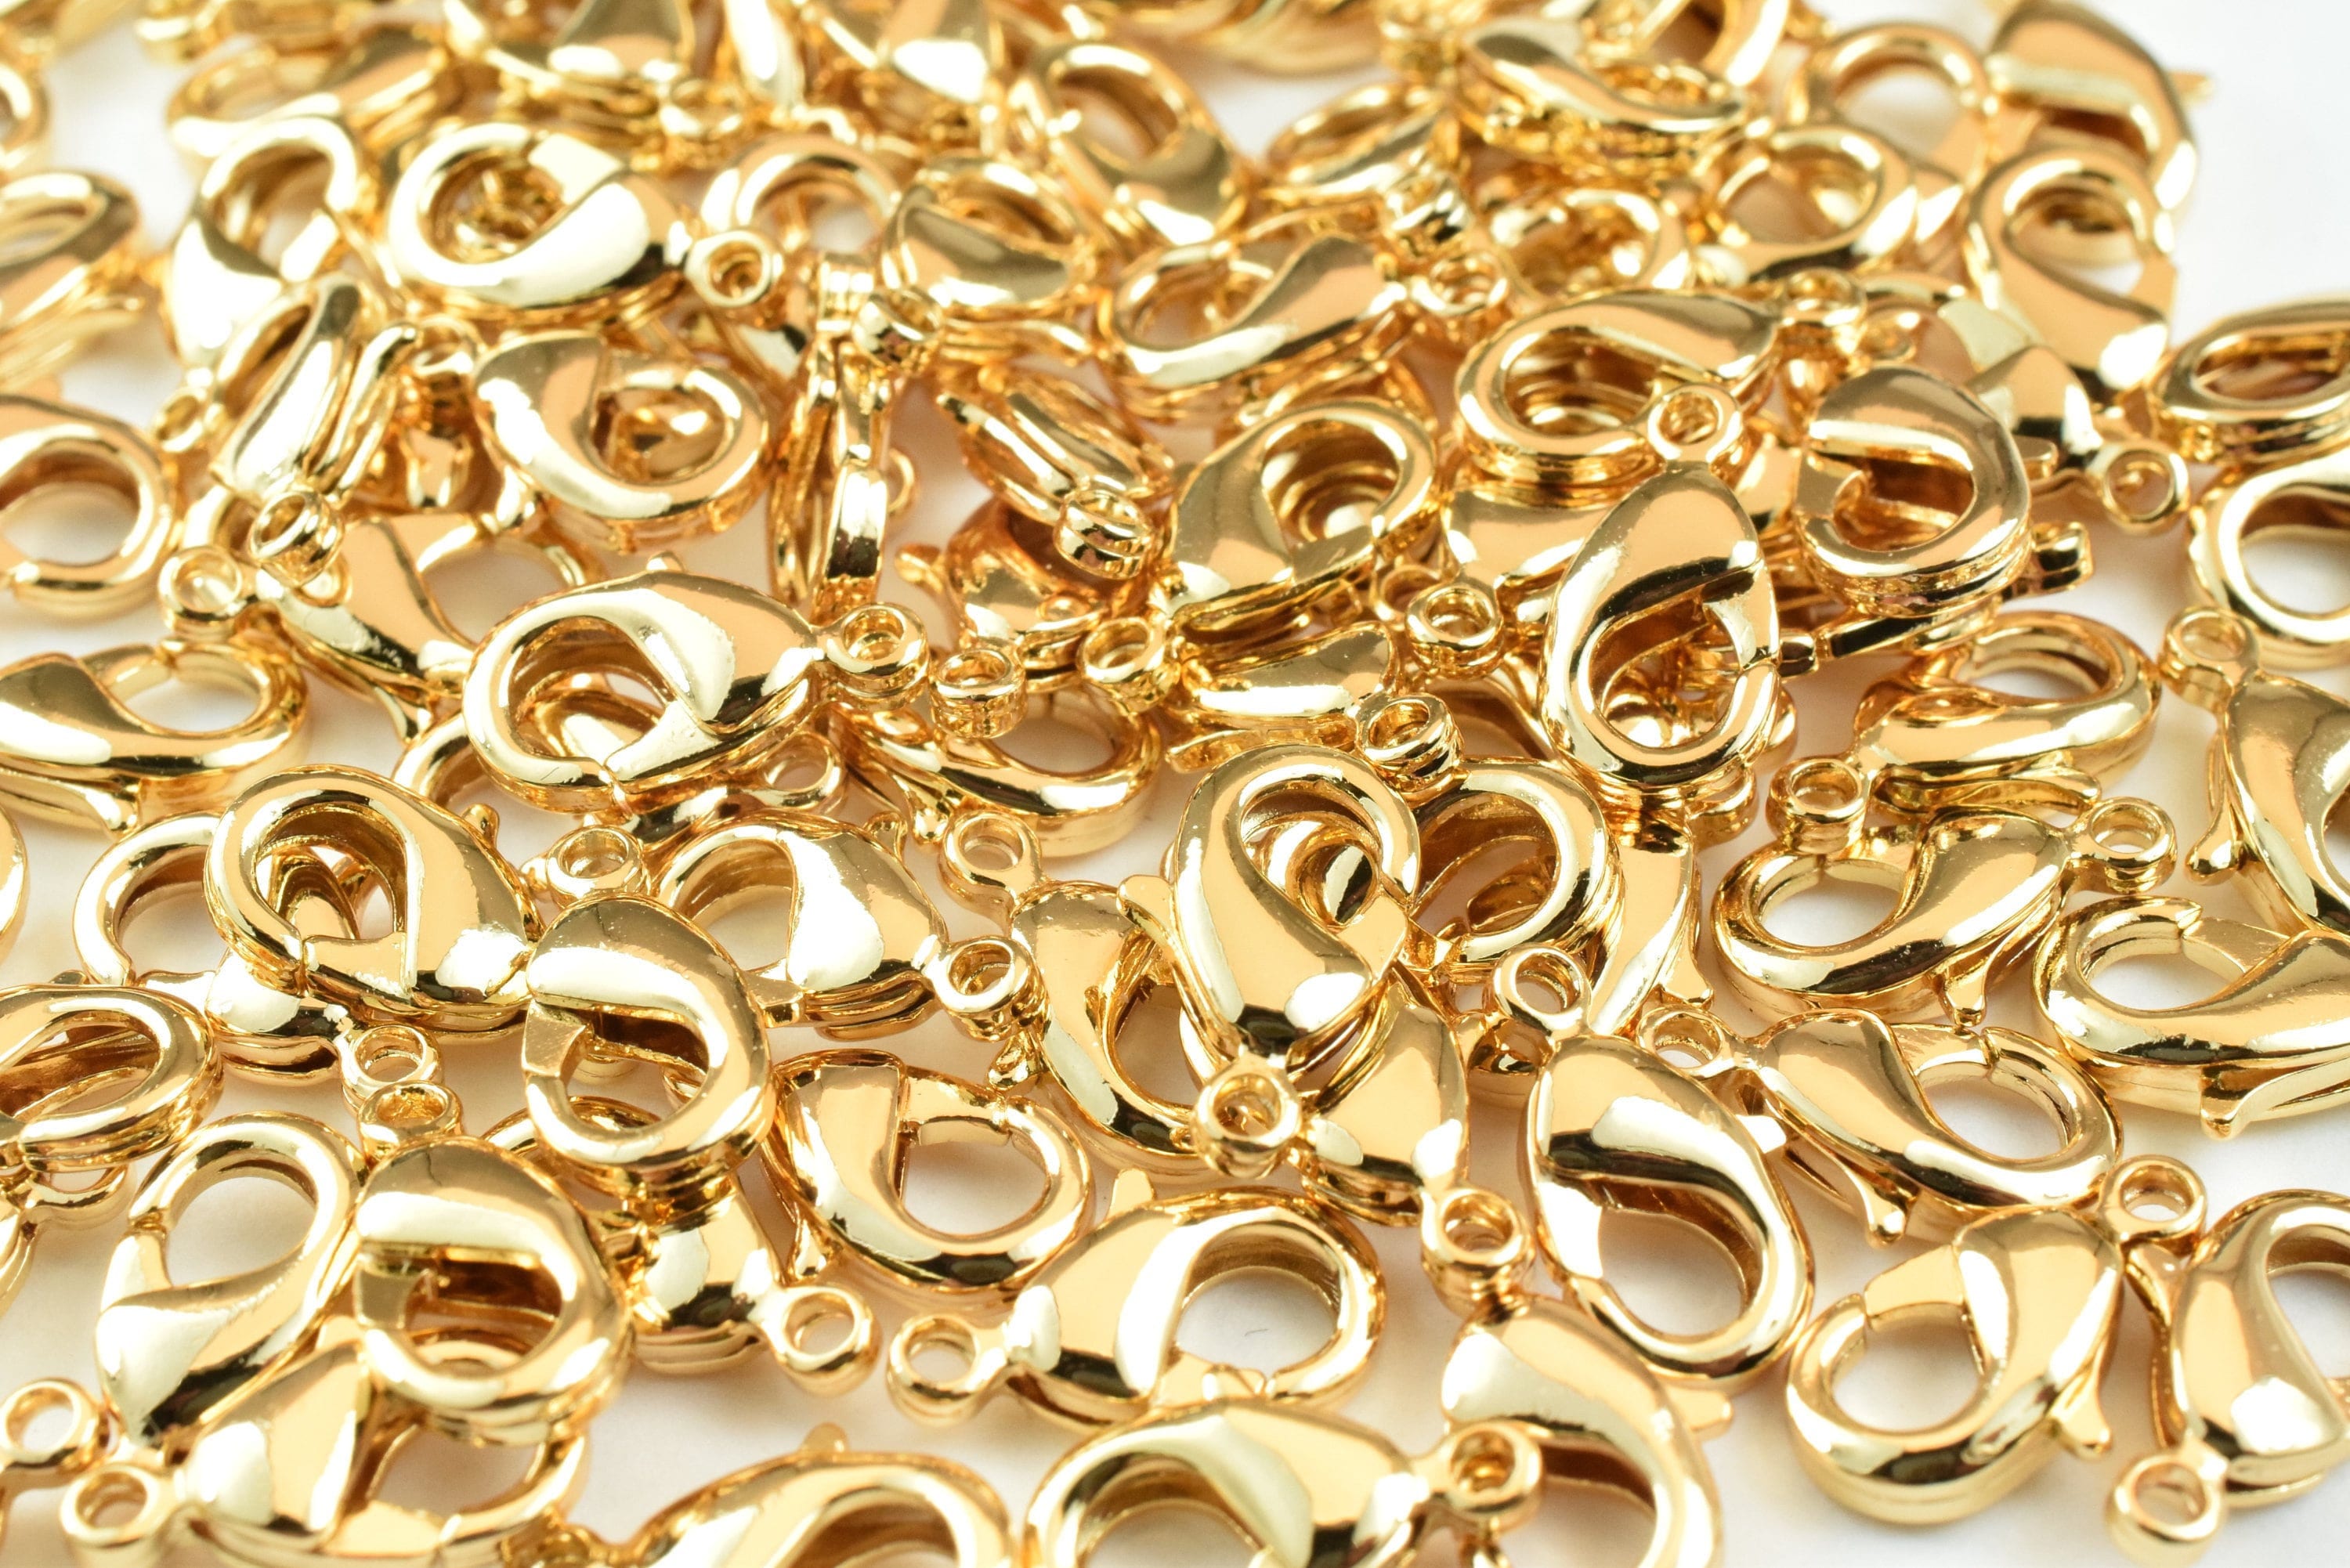 18 Karat Gold Plated Lobster Claw Clasps in Bulk for DIY Jewelry – Athenian  Fashions Inc.